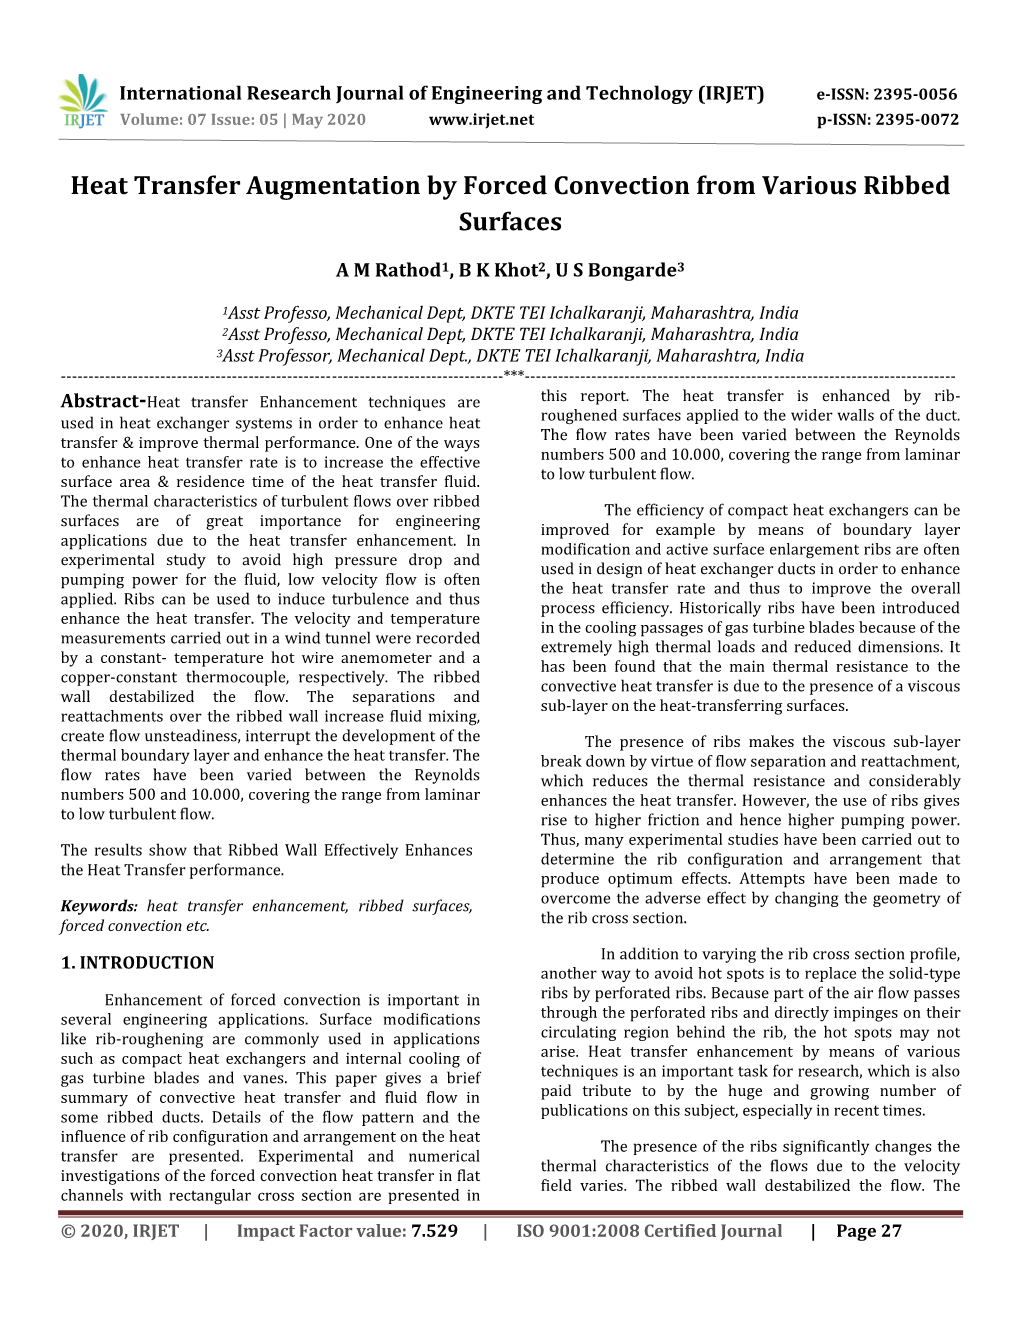 Heat Transfer Augmentation by Forced Convection from Various Ribbed Surfaces